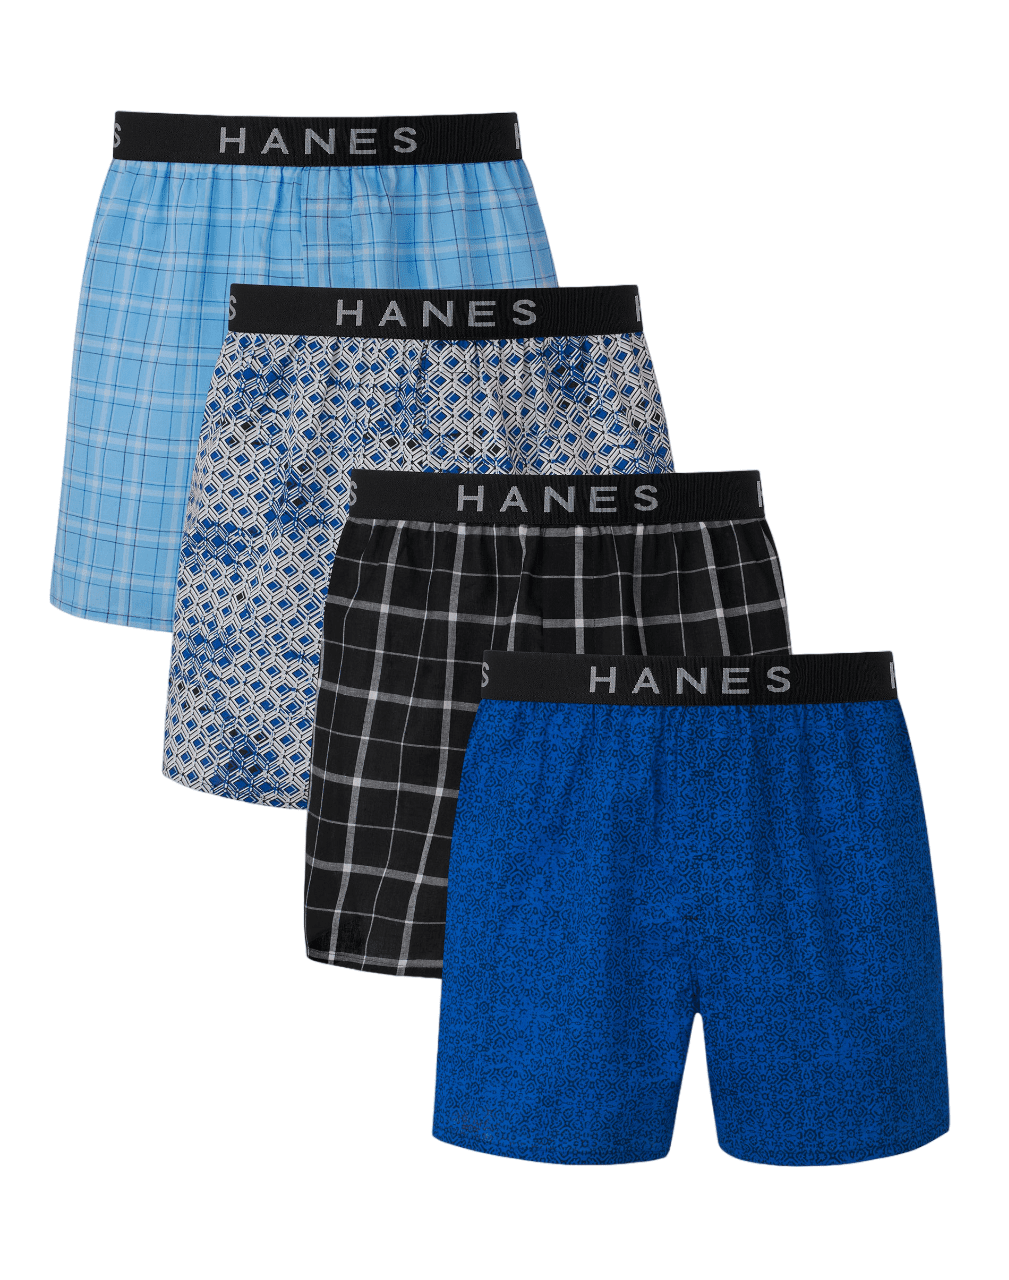 Hanes Ultimate Men's Brief Underwear Pack, Full-Rise, Moisture-Wicking  Cotton, Blue Assorted/White, 7-Pack L 